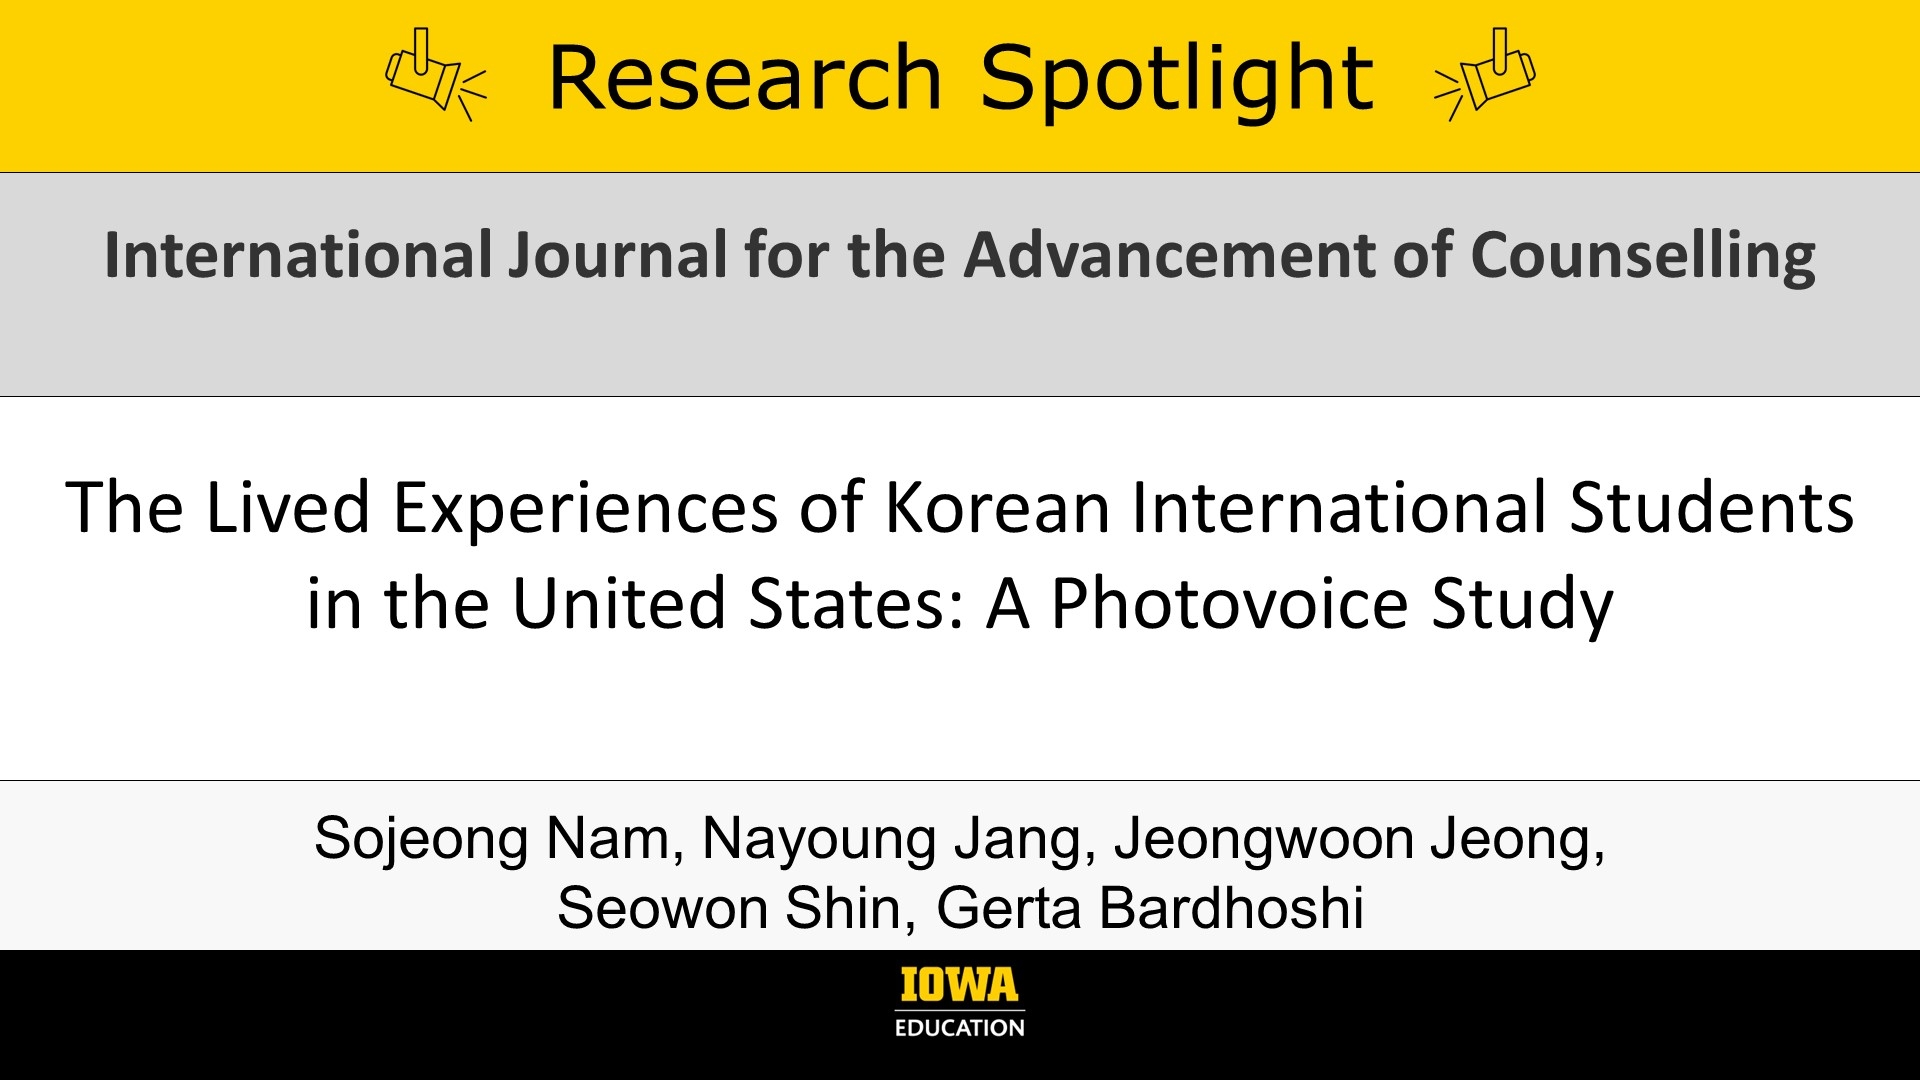 Research Spotlight: The Lived Experiences of Korean International Students in the United States: A Photovoice Study. In International Journal for the Advancement of Counselling